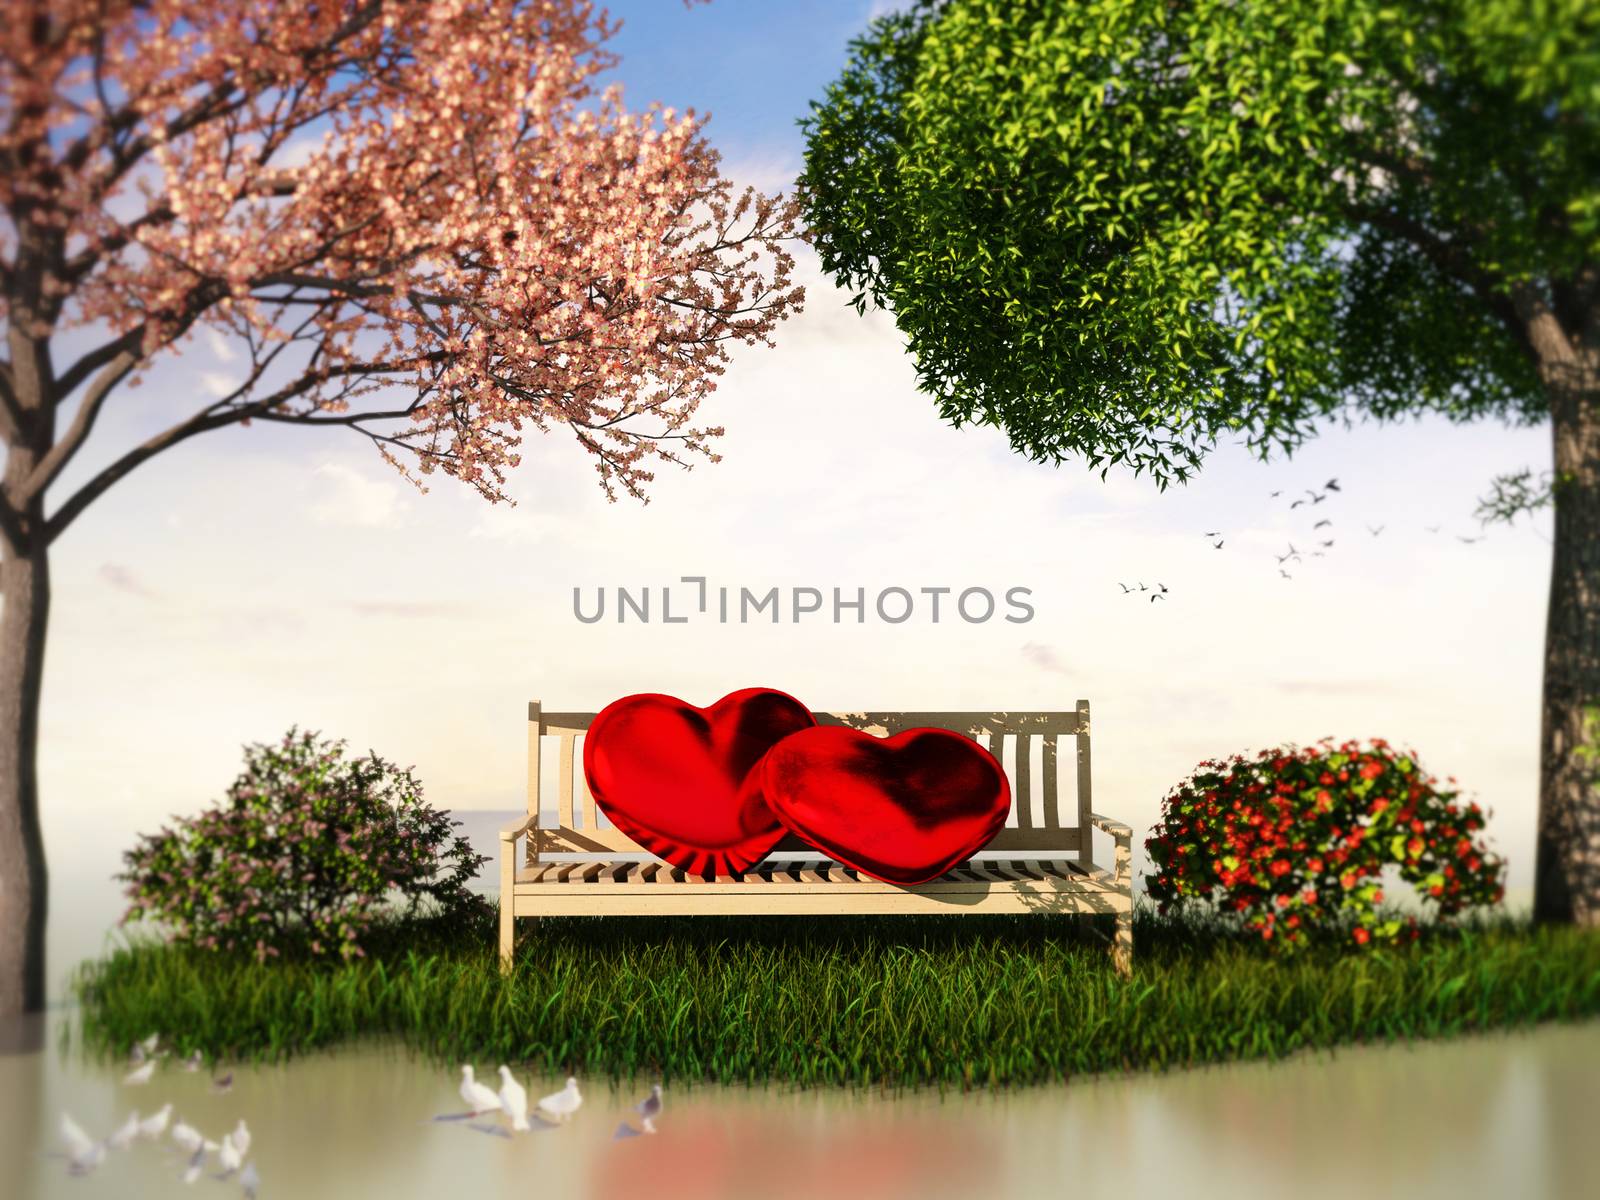 3D Valentin  view for love and romance by fares139